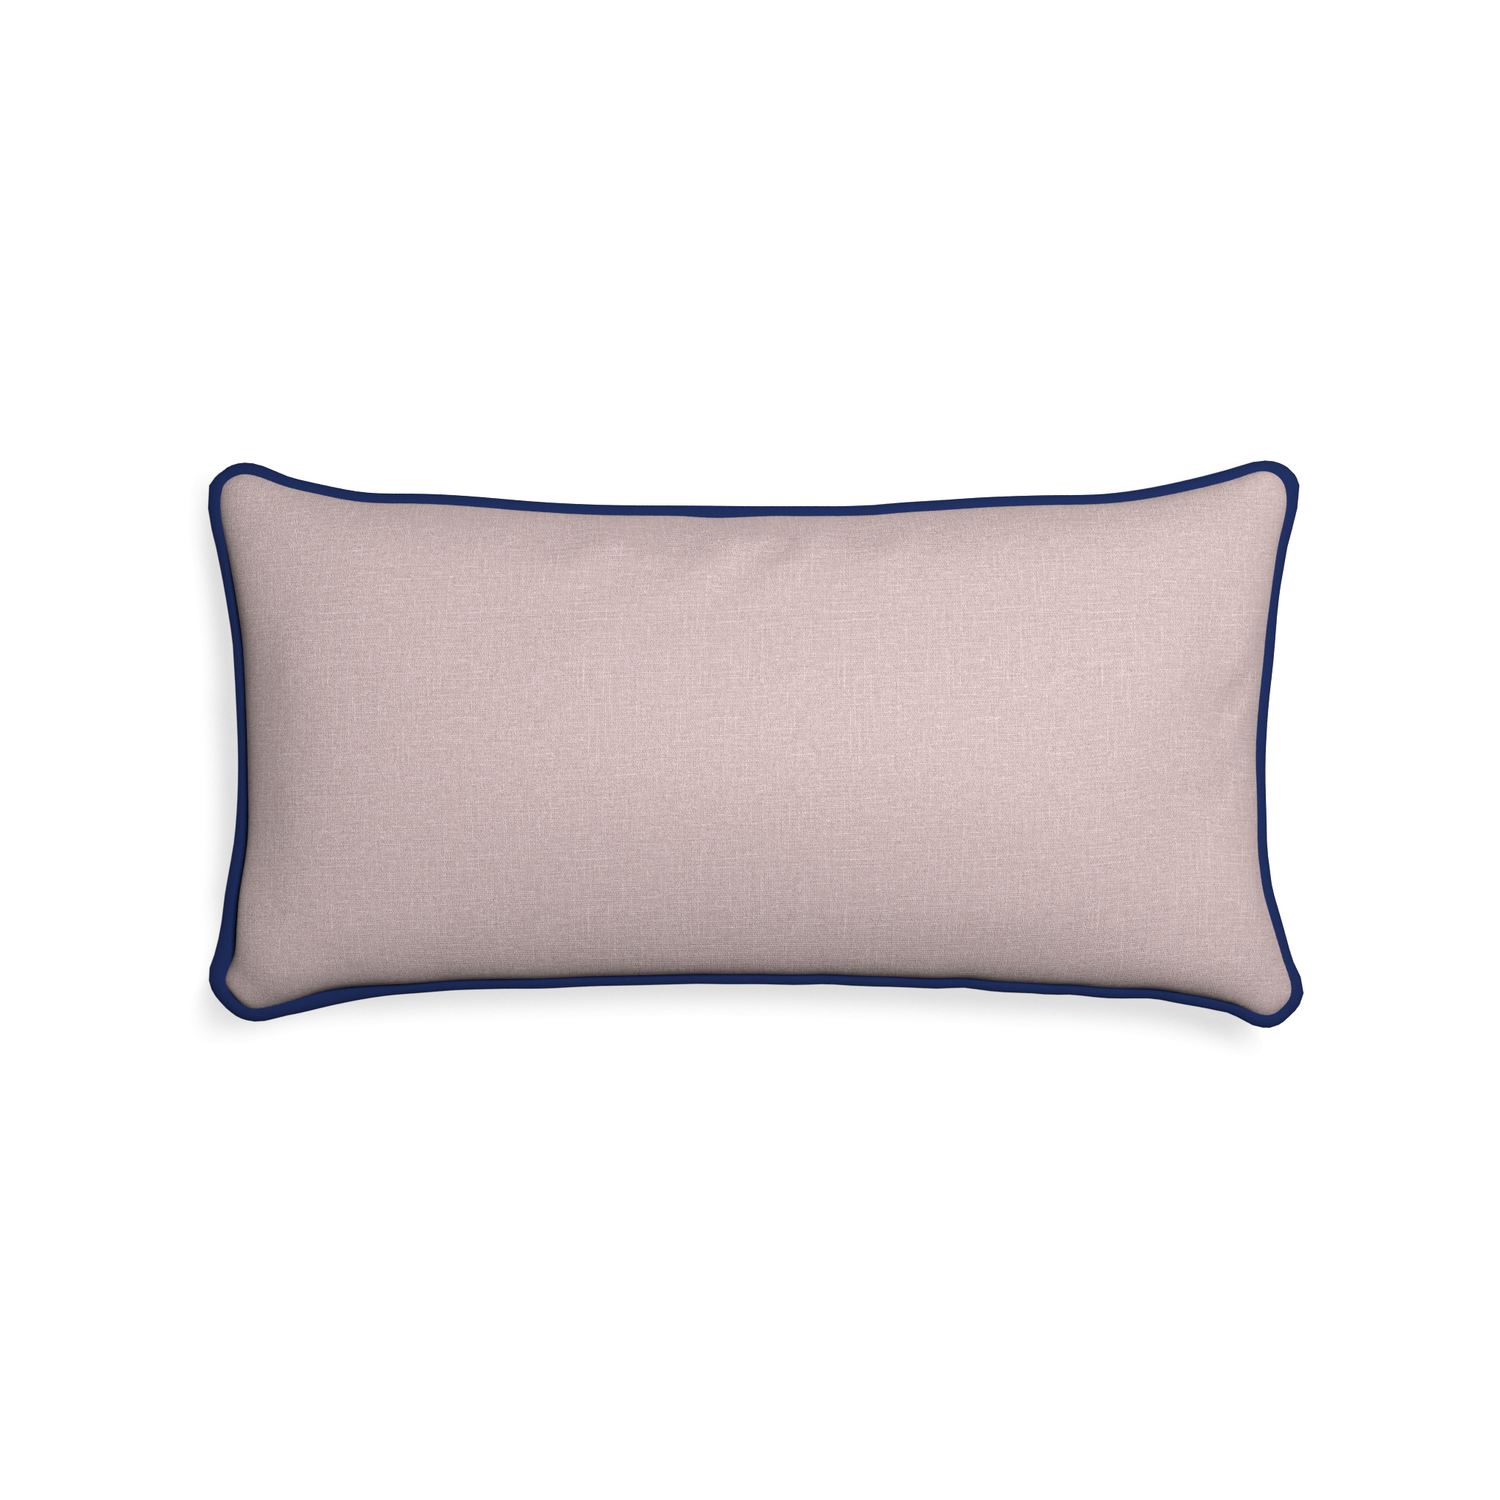 Midi-lumbar orchid custom mauve pinkpillow with midnight piping on white background